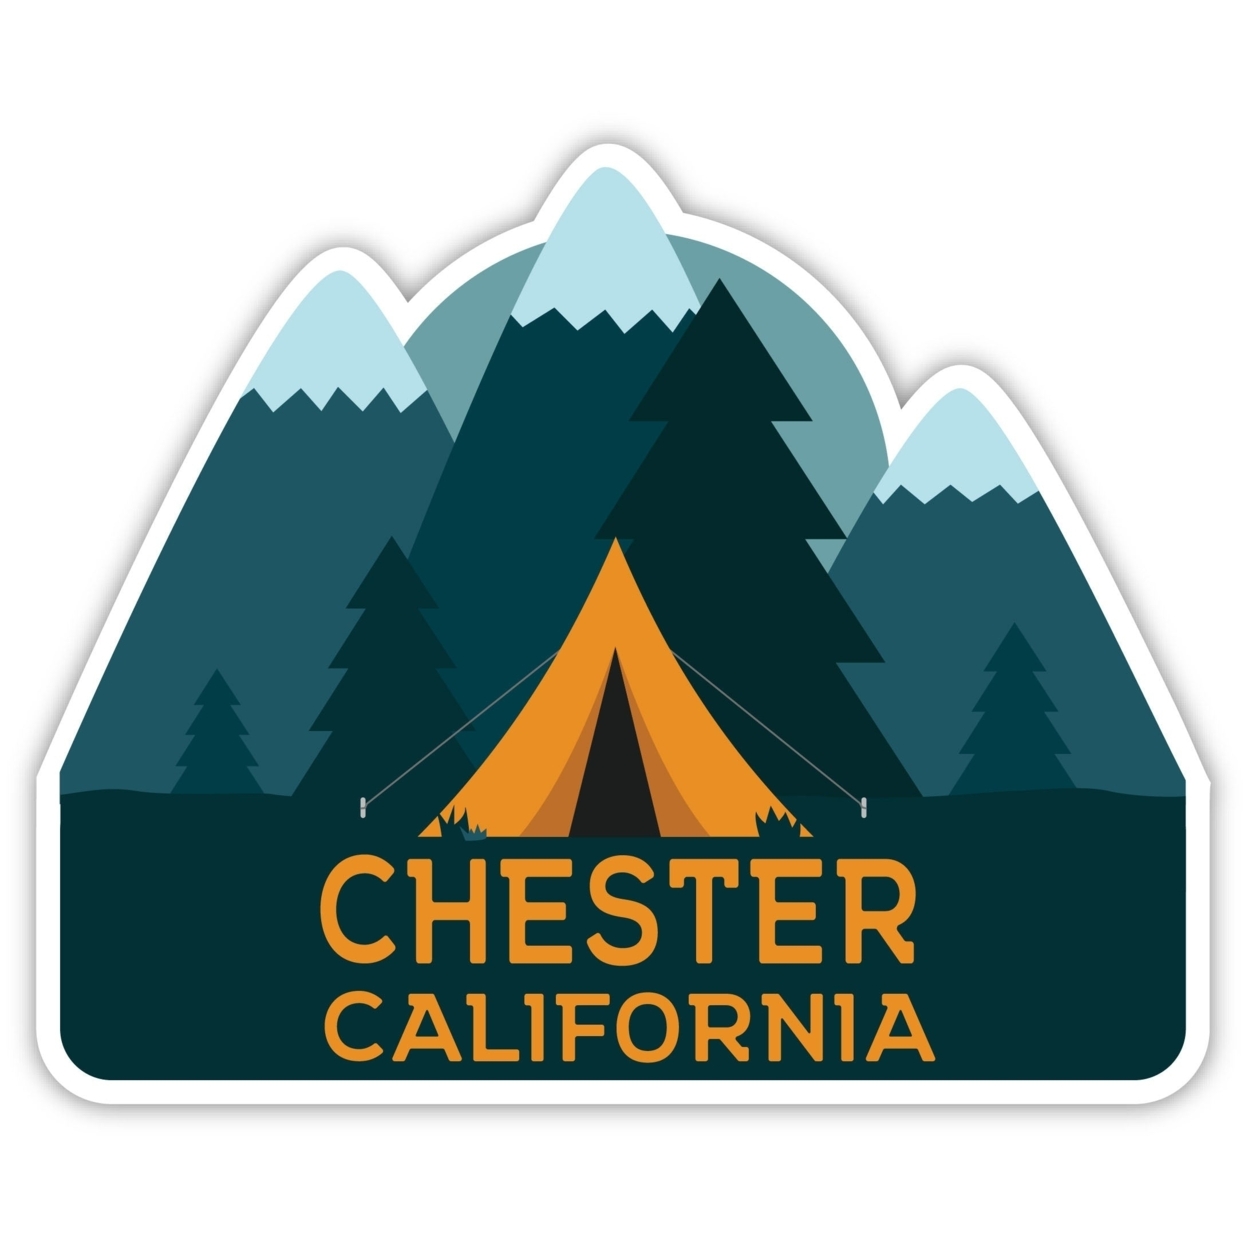 Chester California Souvenir Decorative Stickers (Choose Theme And Size) - 4-Pack, 4-Inch, Tent